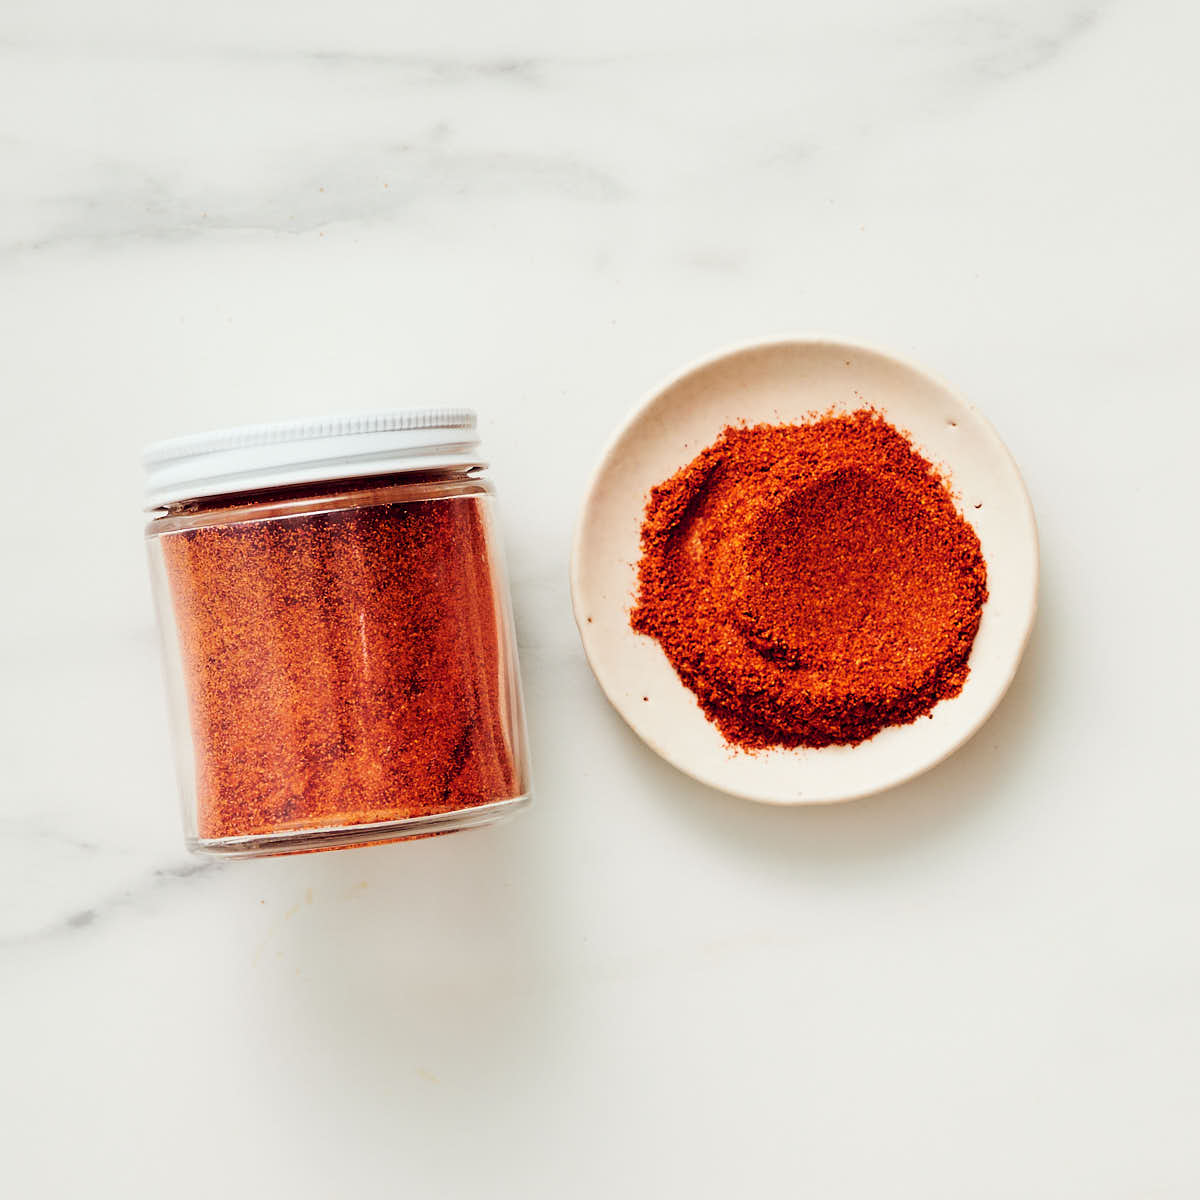 Cayenne in a spice jar and in a small dish on a kitchen counter.